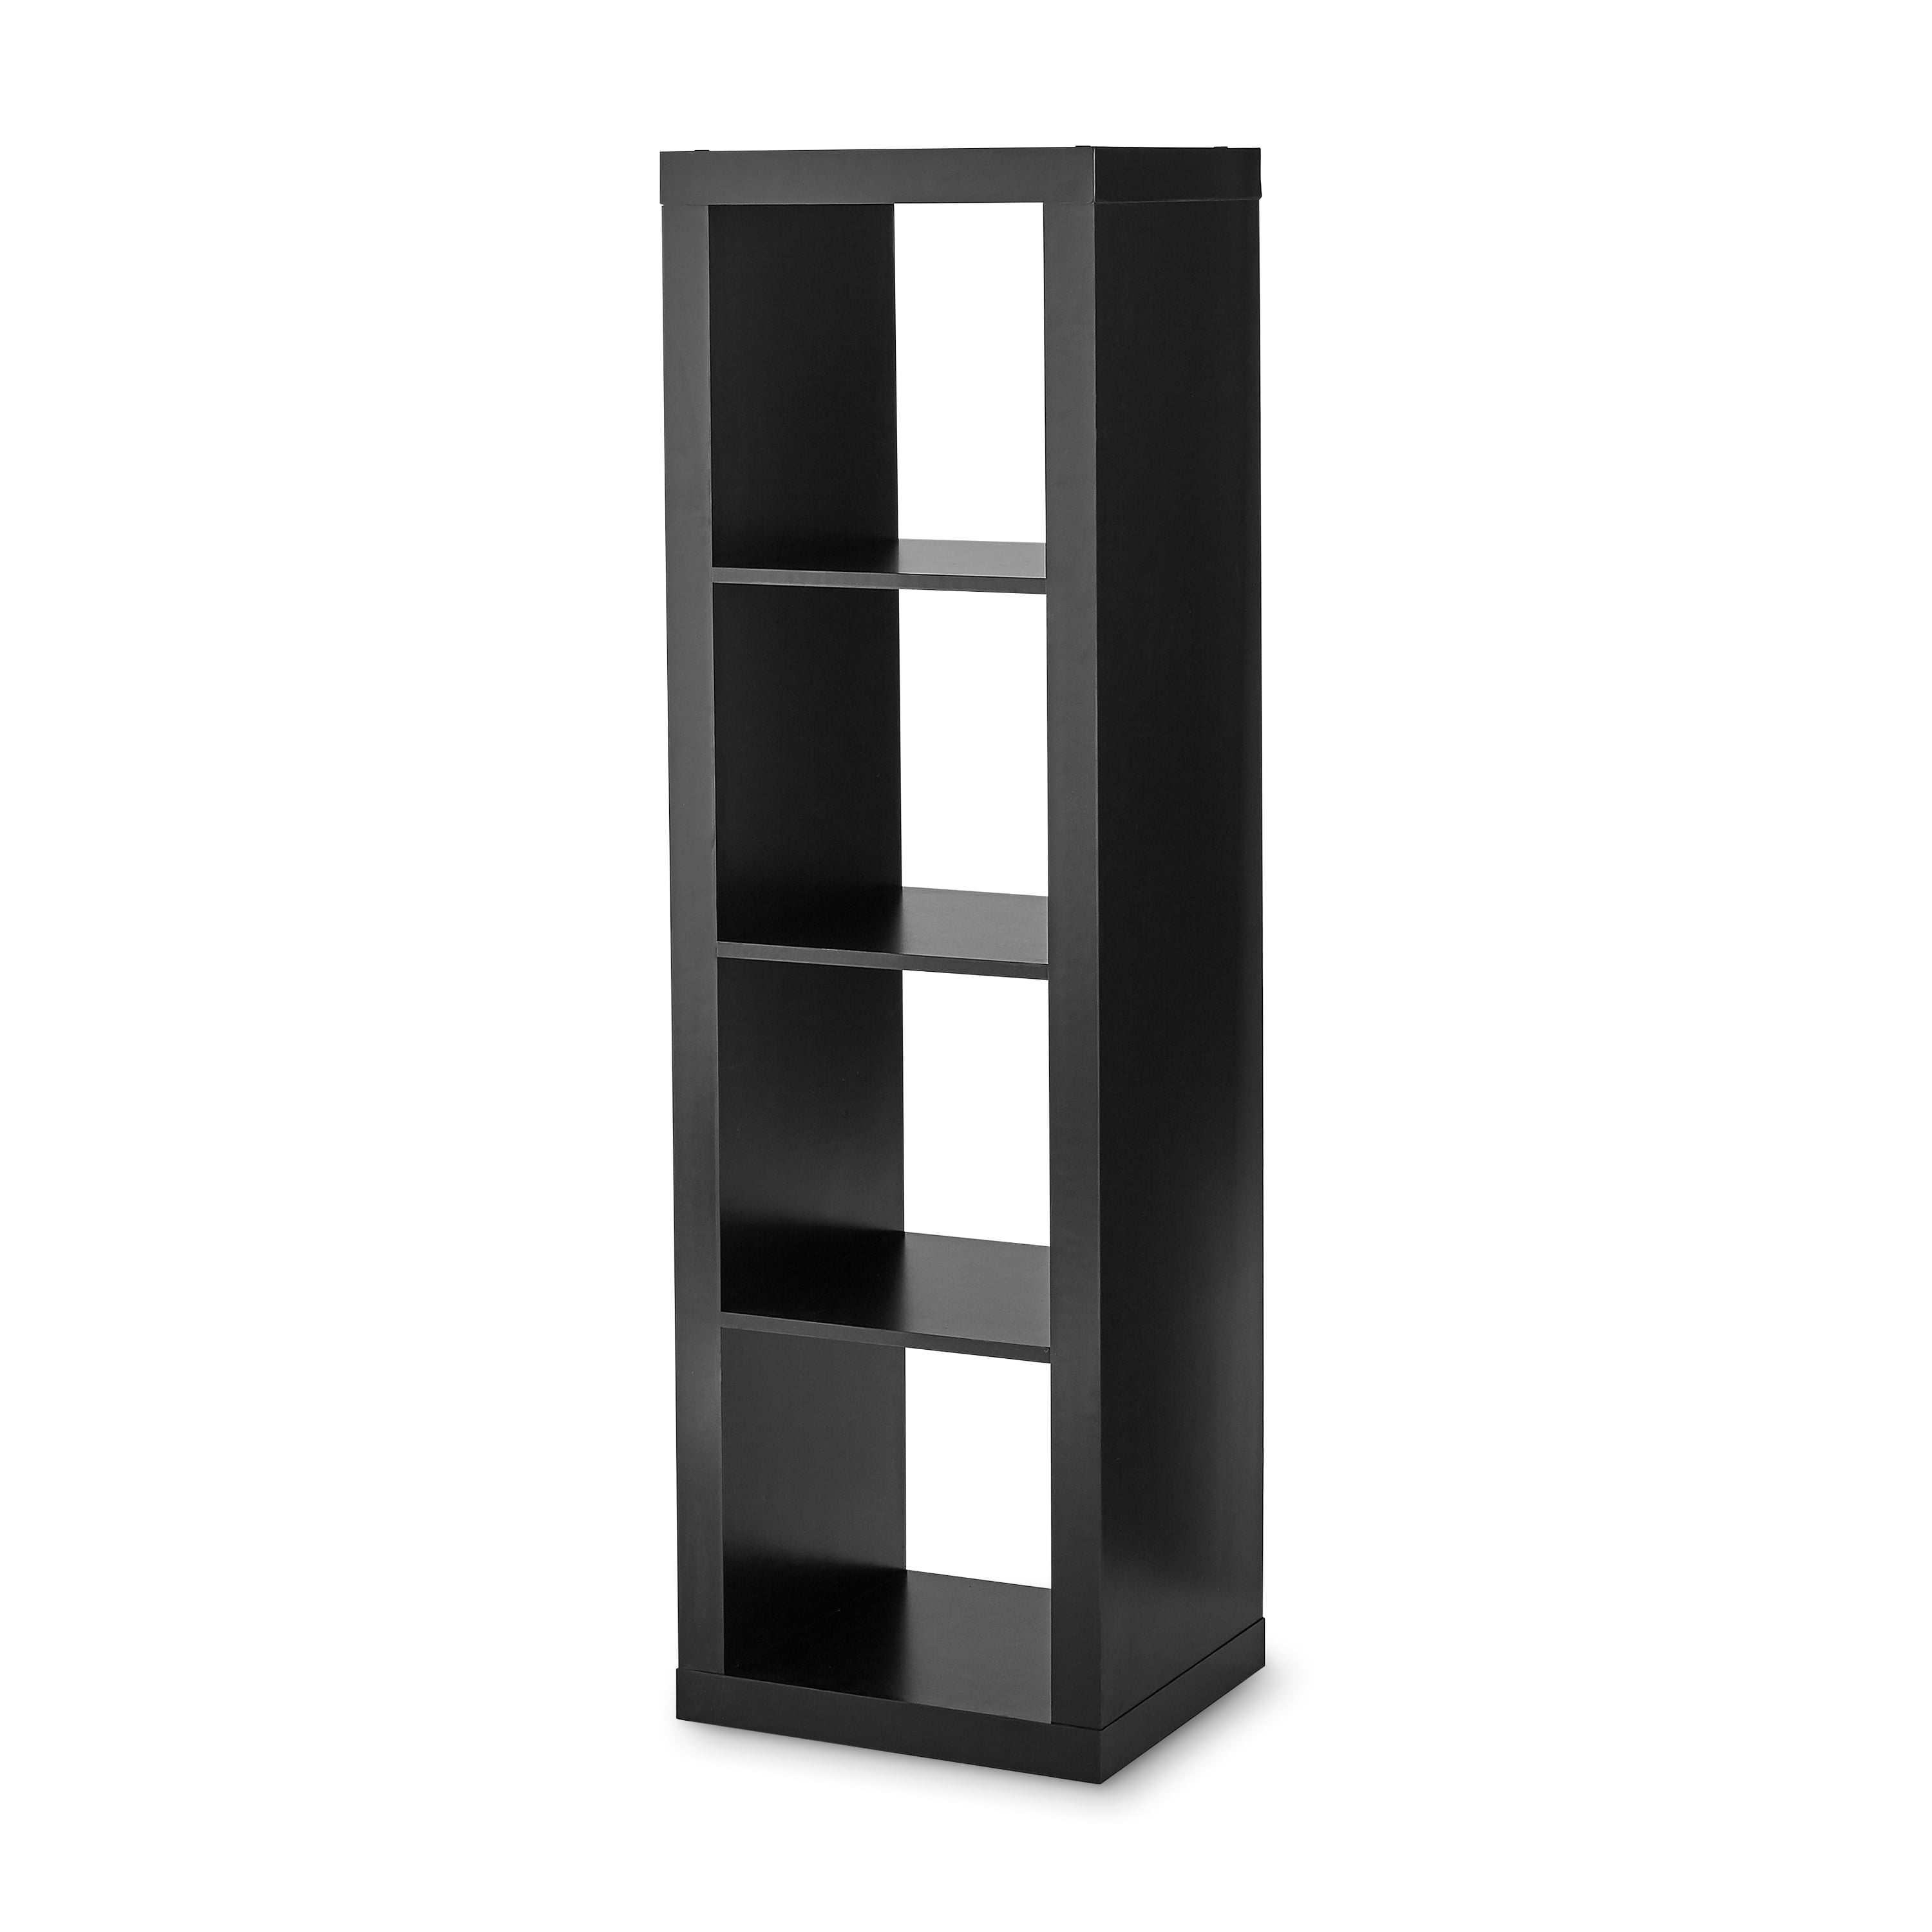 Better Homes and Gardens 4 Cube Organizer Storage Bookcase Multiple Colors